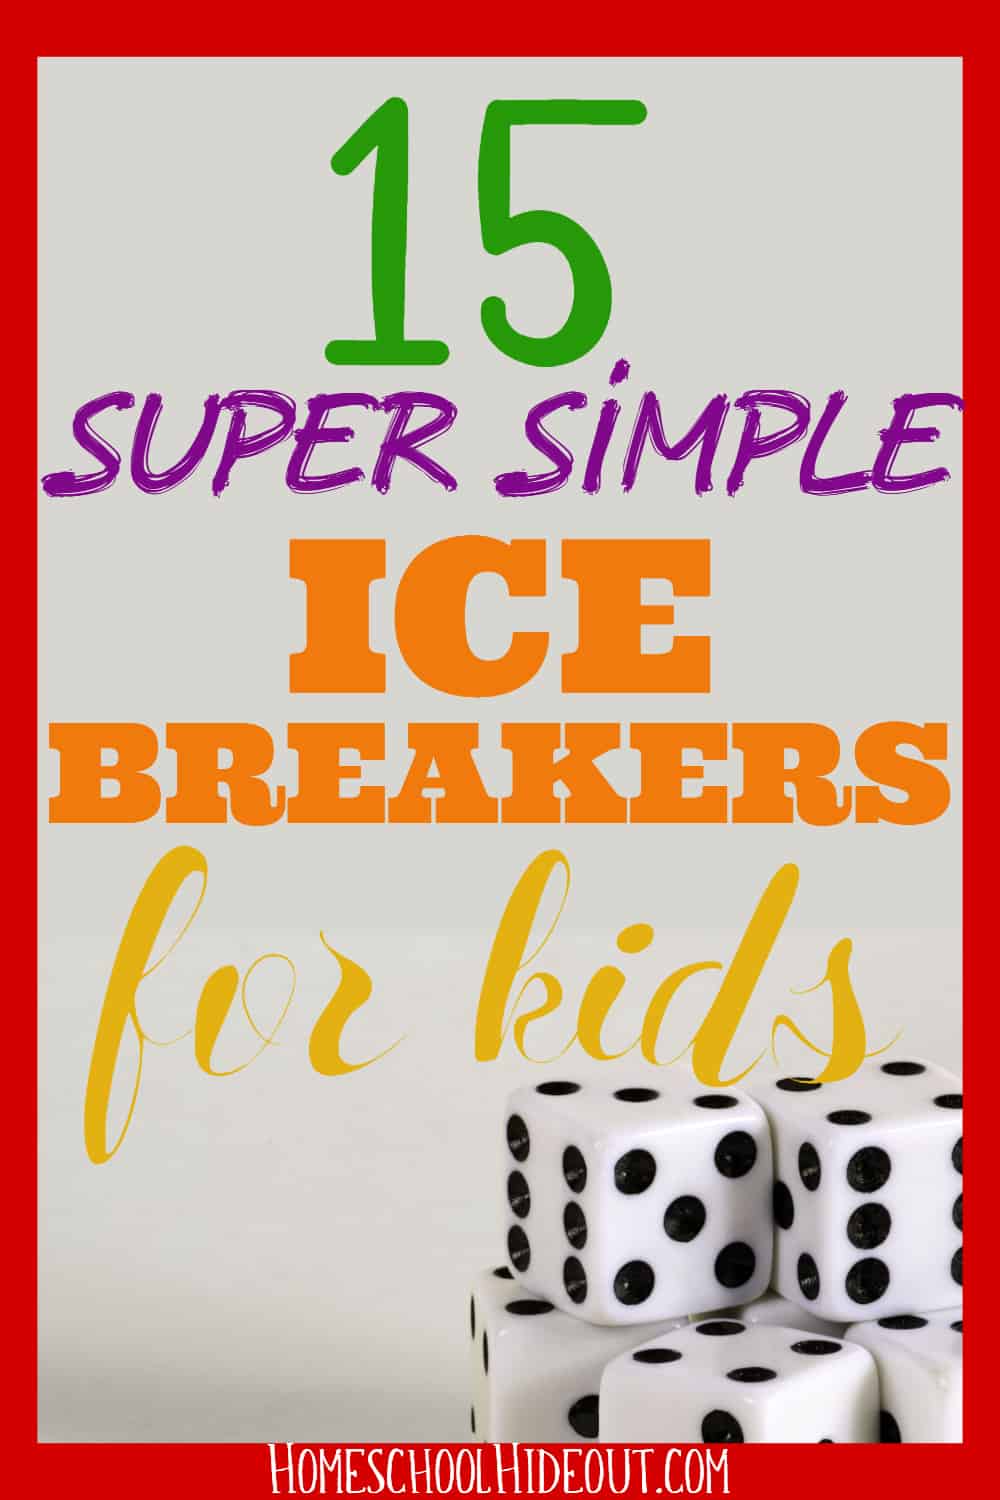 This simple game from Homeschool Hideout is the perfect ice breaker for kids! All you need is the free printable and a bag of Skittles. #icebreaker #games #activities #gettingtoknowyou #kids #makingfriends